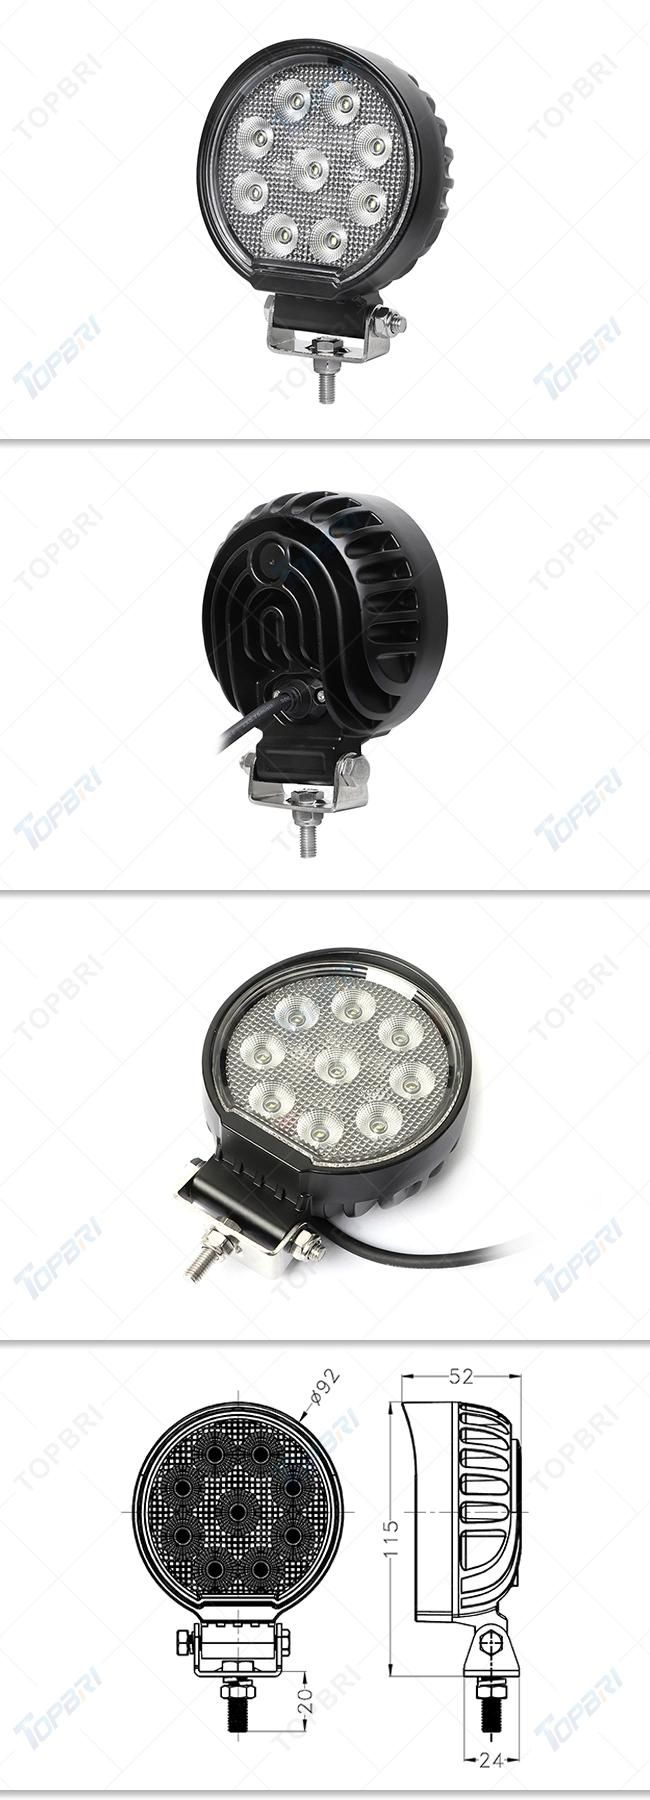 Auto Car Truck Motorcycle Light 27W Round LED Work Lamps